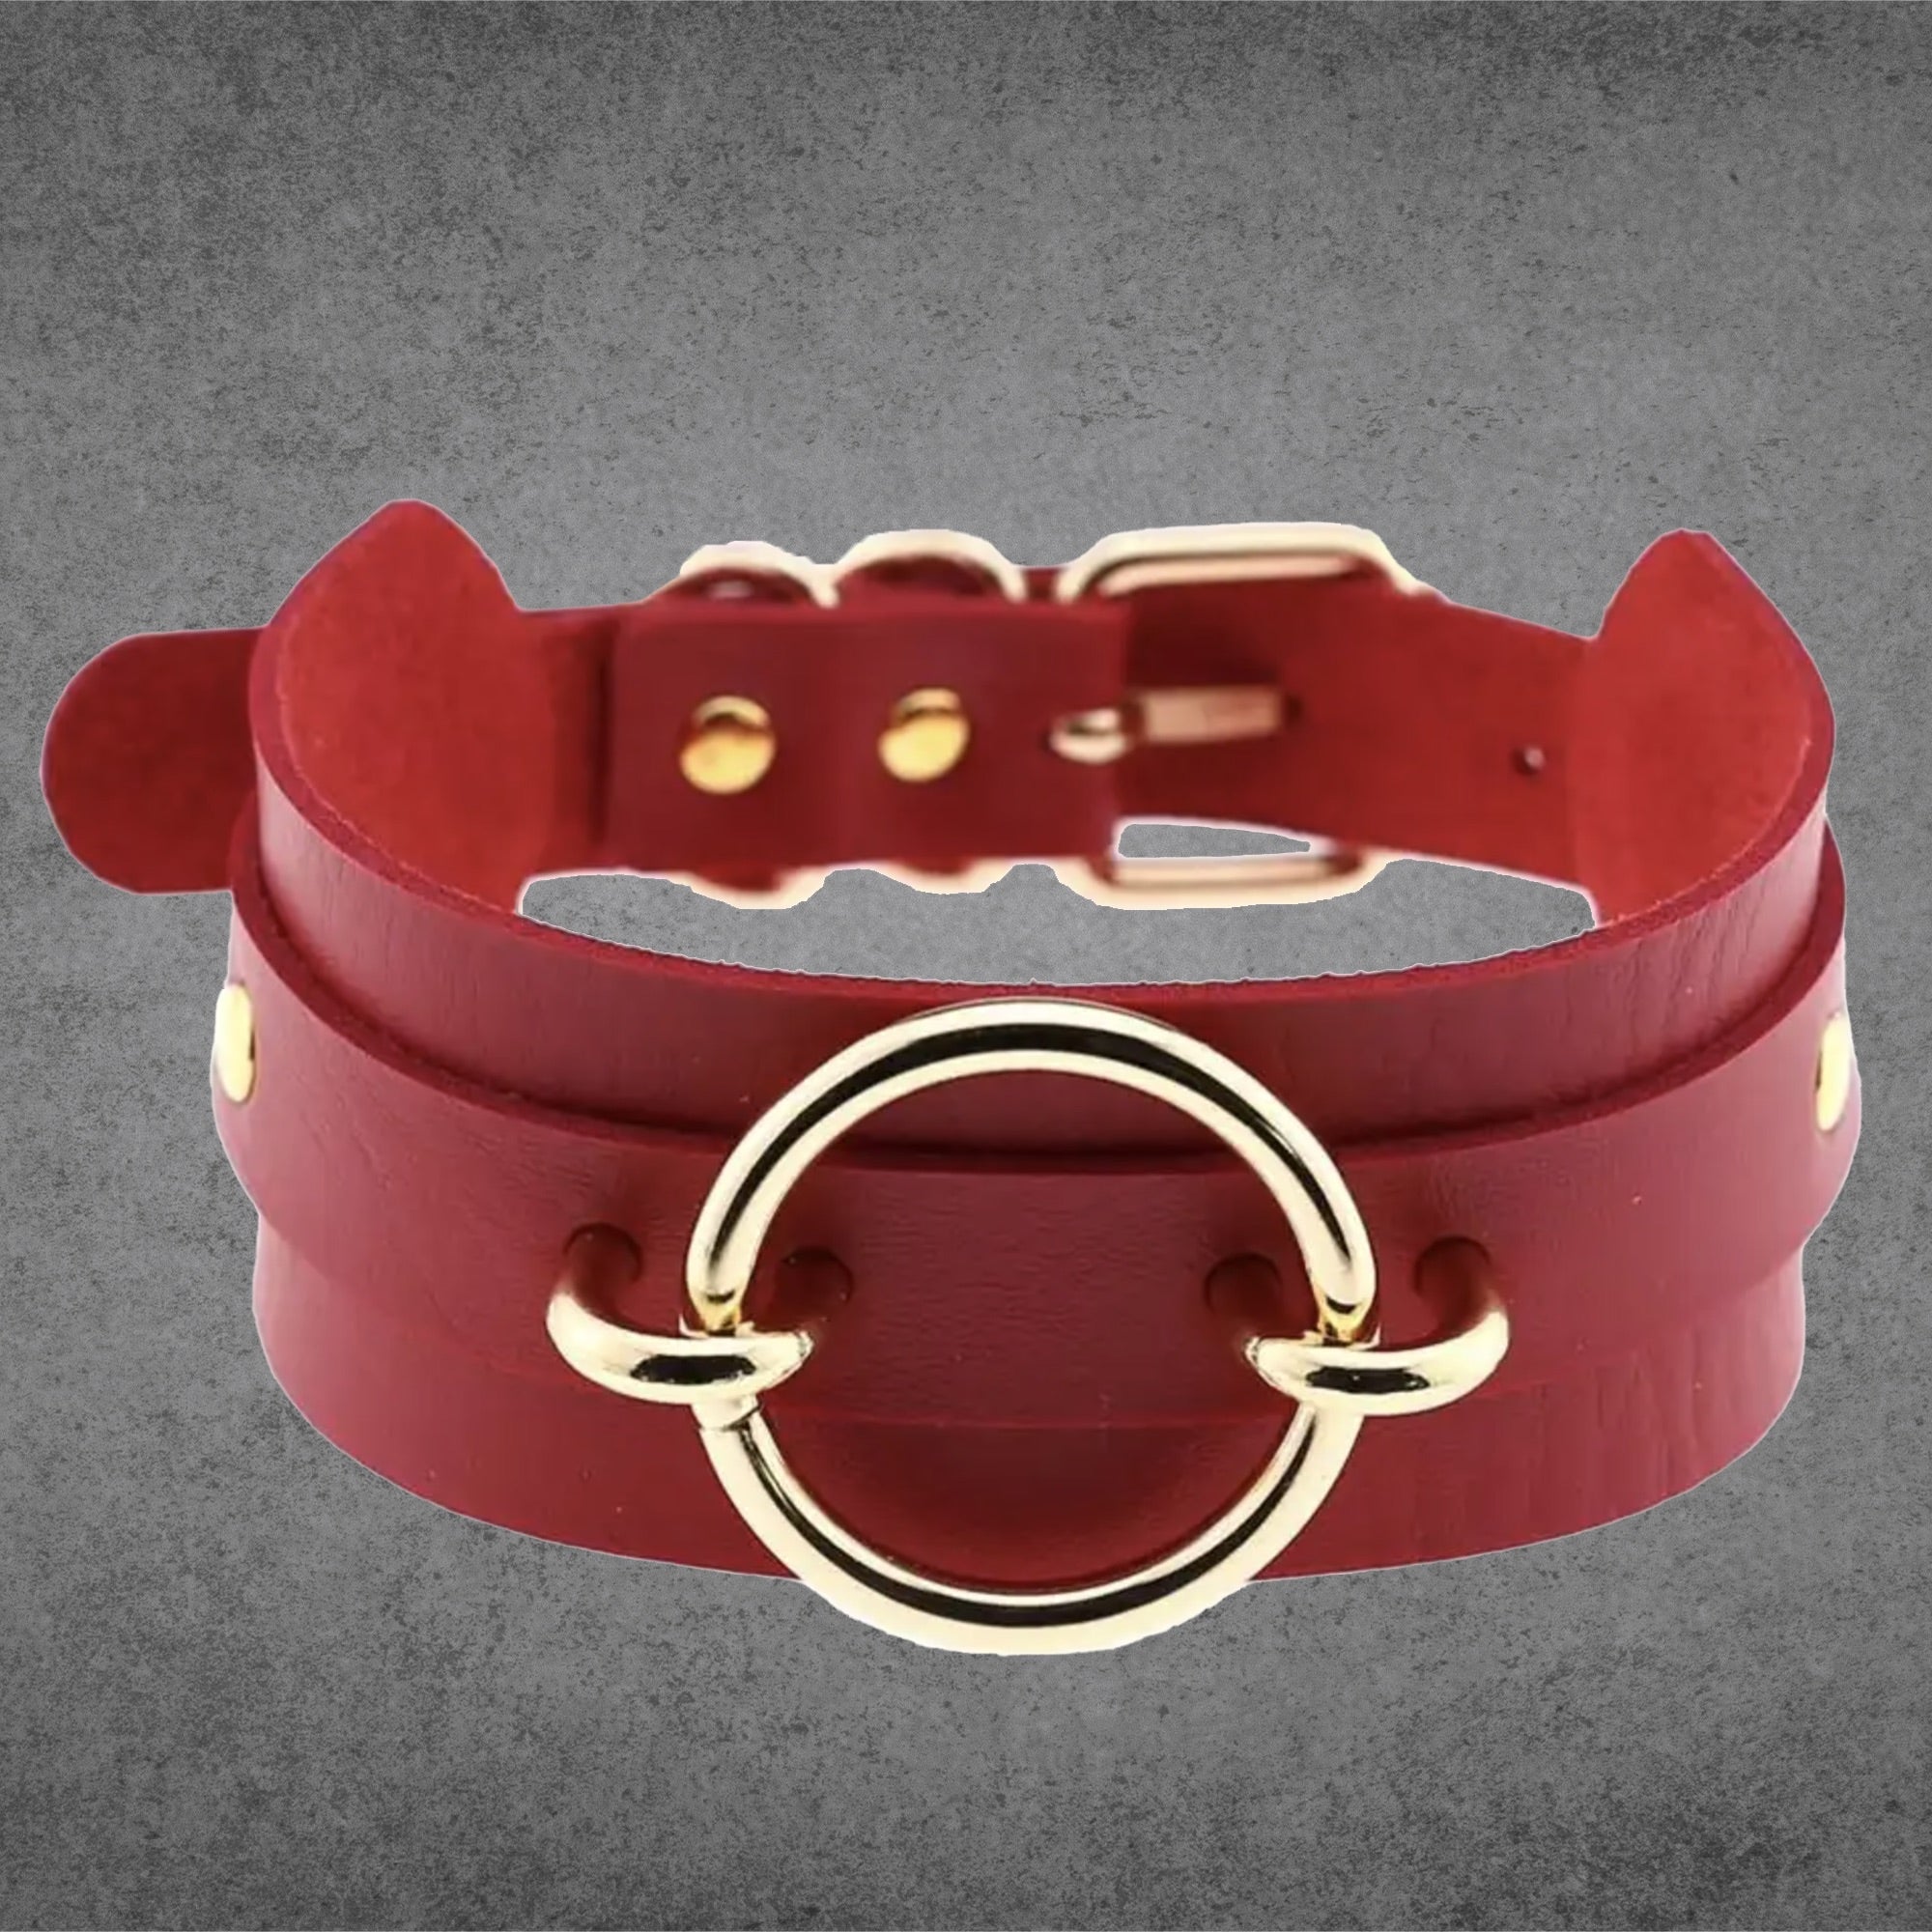 Fixed O Ring Choker Collar - Red & Gold